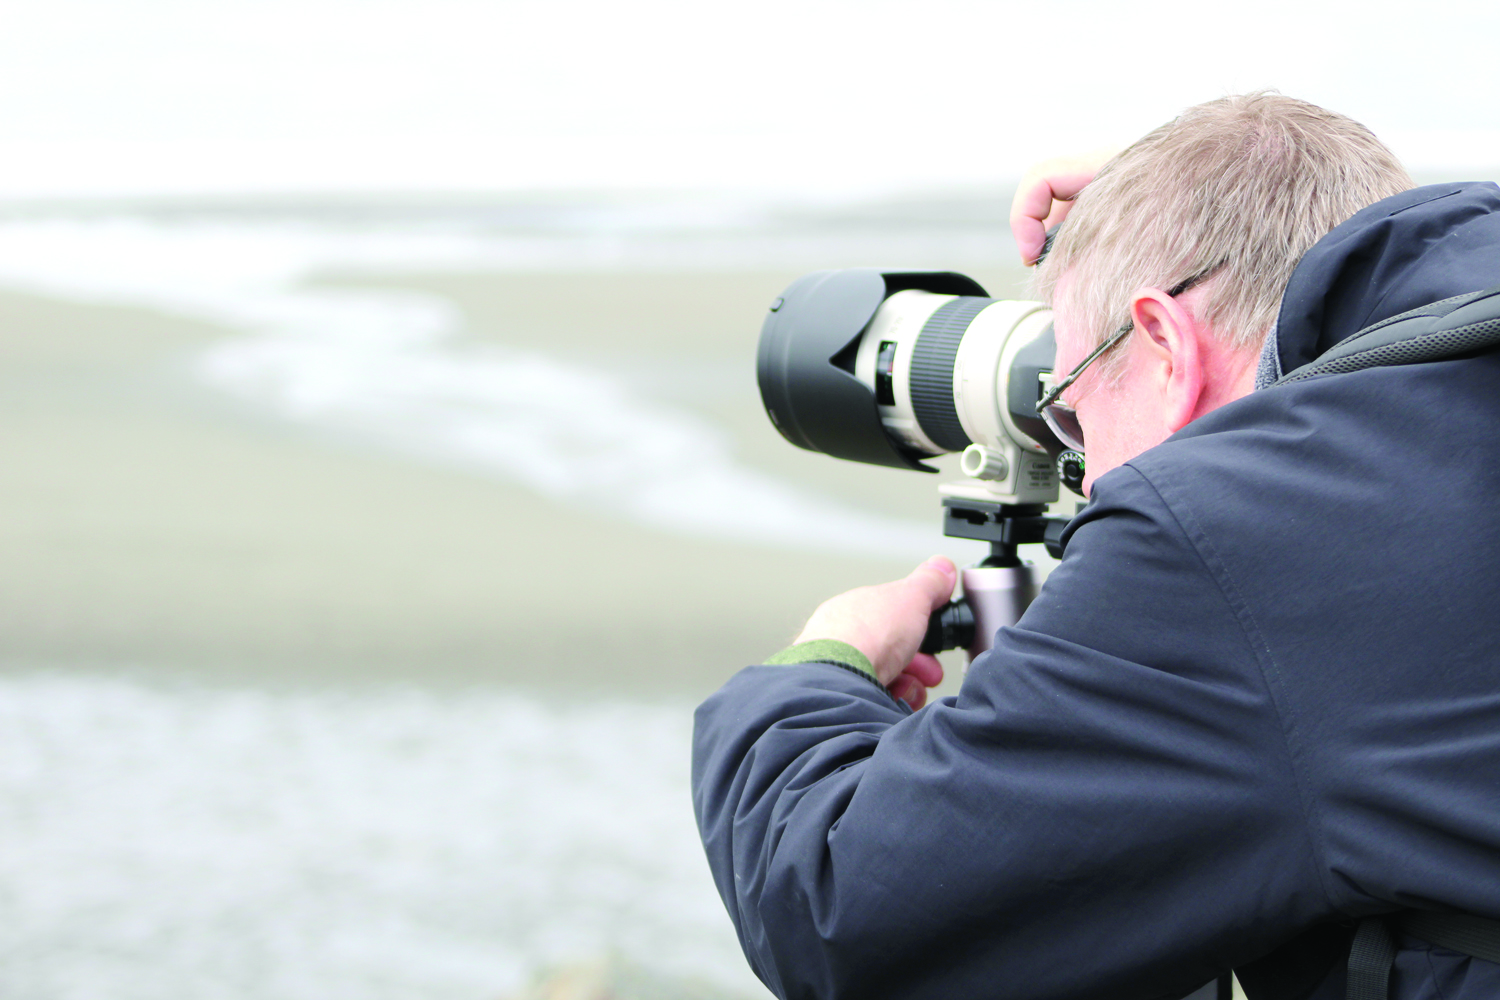 Visitors of the non-feathered variety are also flocking to Homer for the town’s other attractions. Brad Warner, a doctor from St. Louis, Missouri, takes a photo of the Spit Beach at low tide on May 9. Warner came to Homer to fish with friends.-Photo by Anna Frost, Homer News